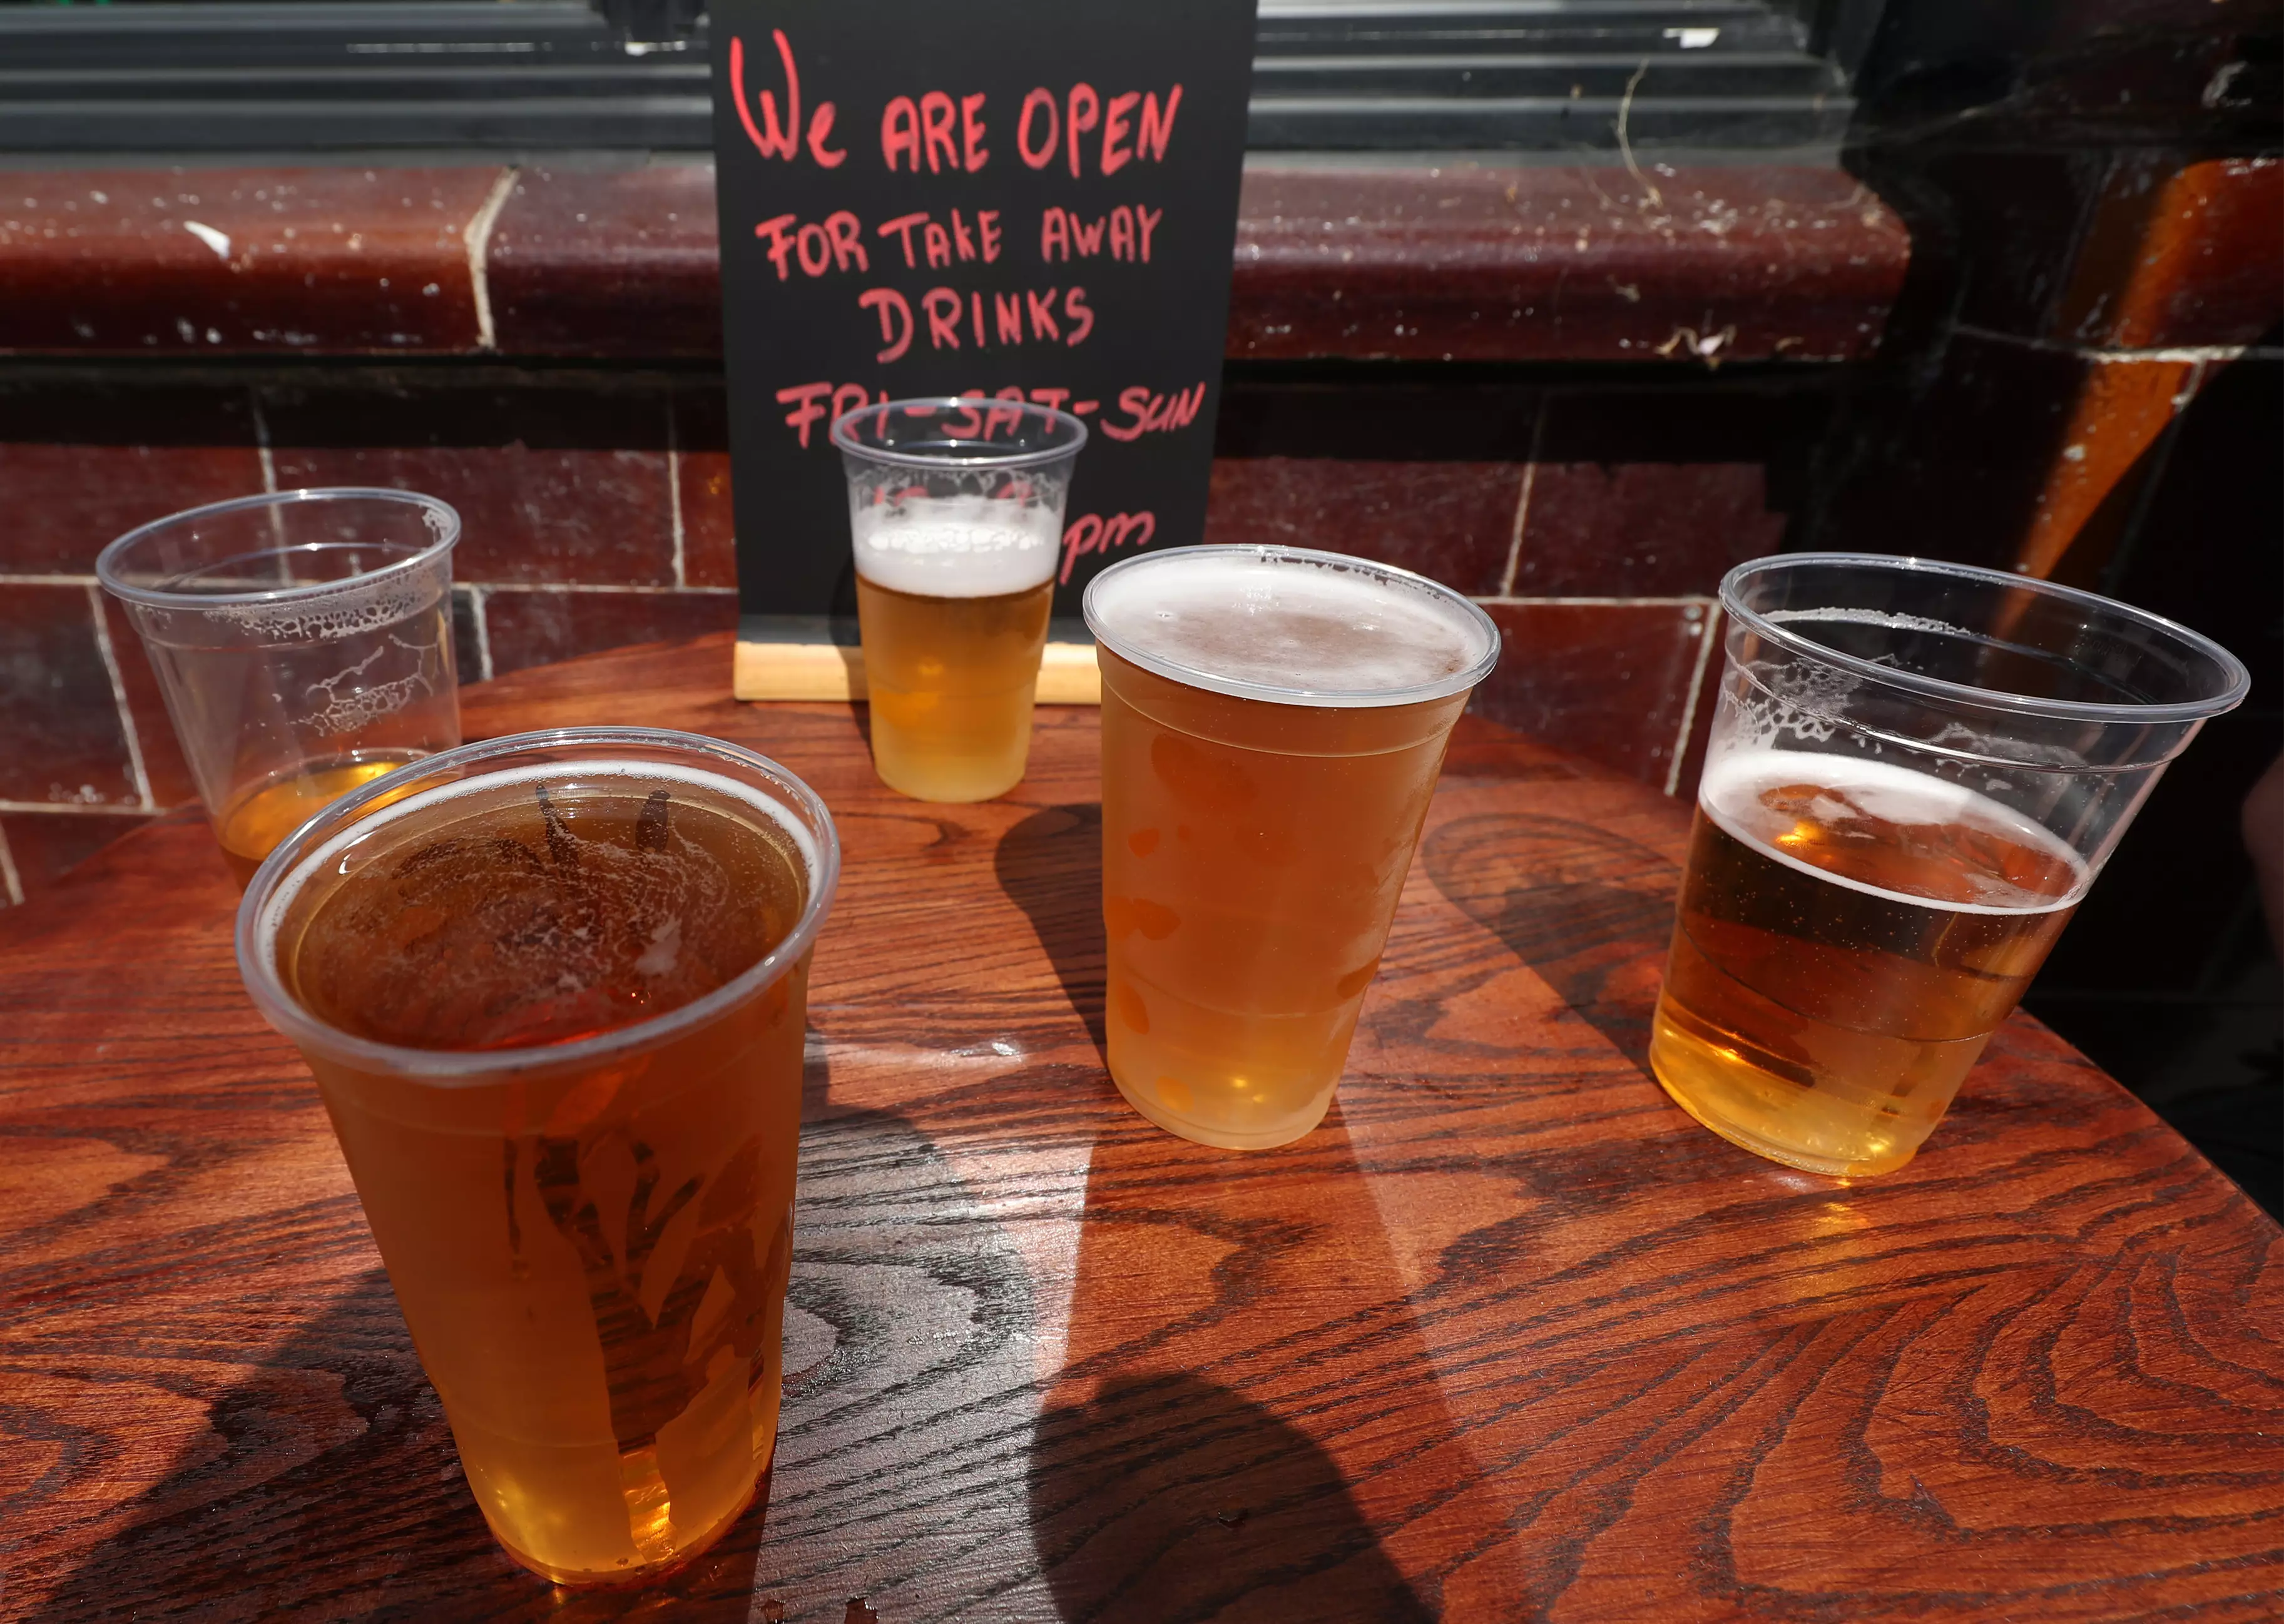 Alcohol is banned for takeaway and click-and-collect under the national lockdown.